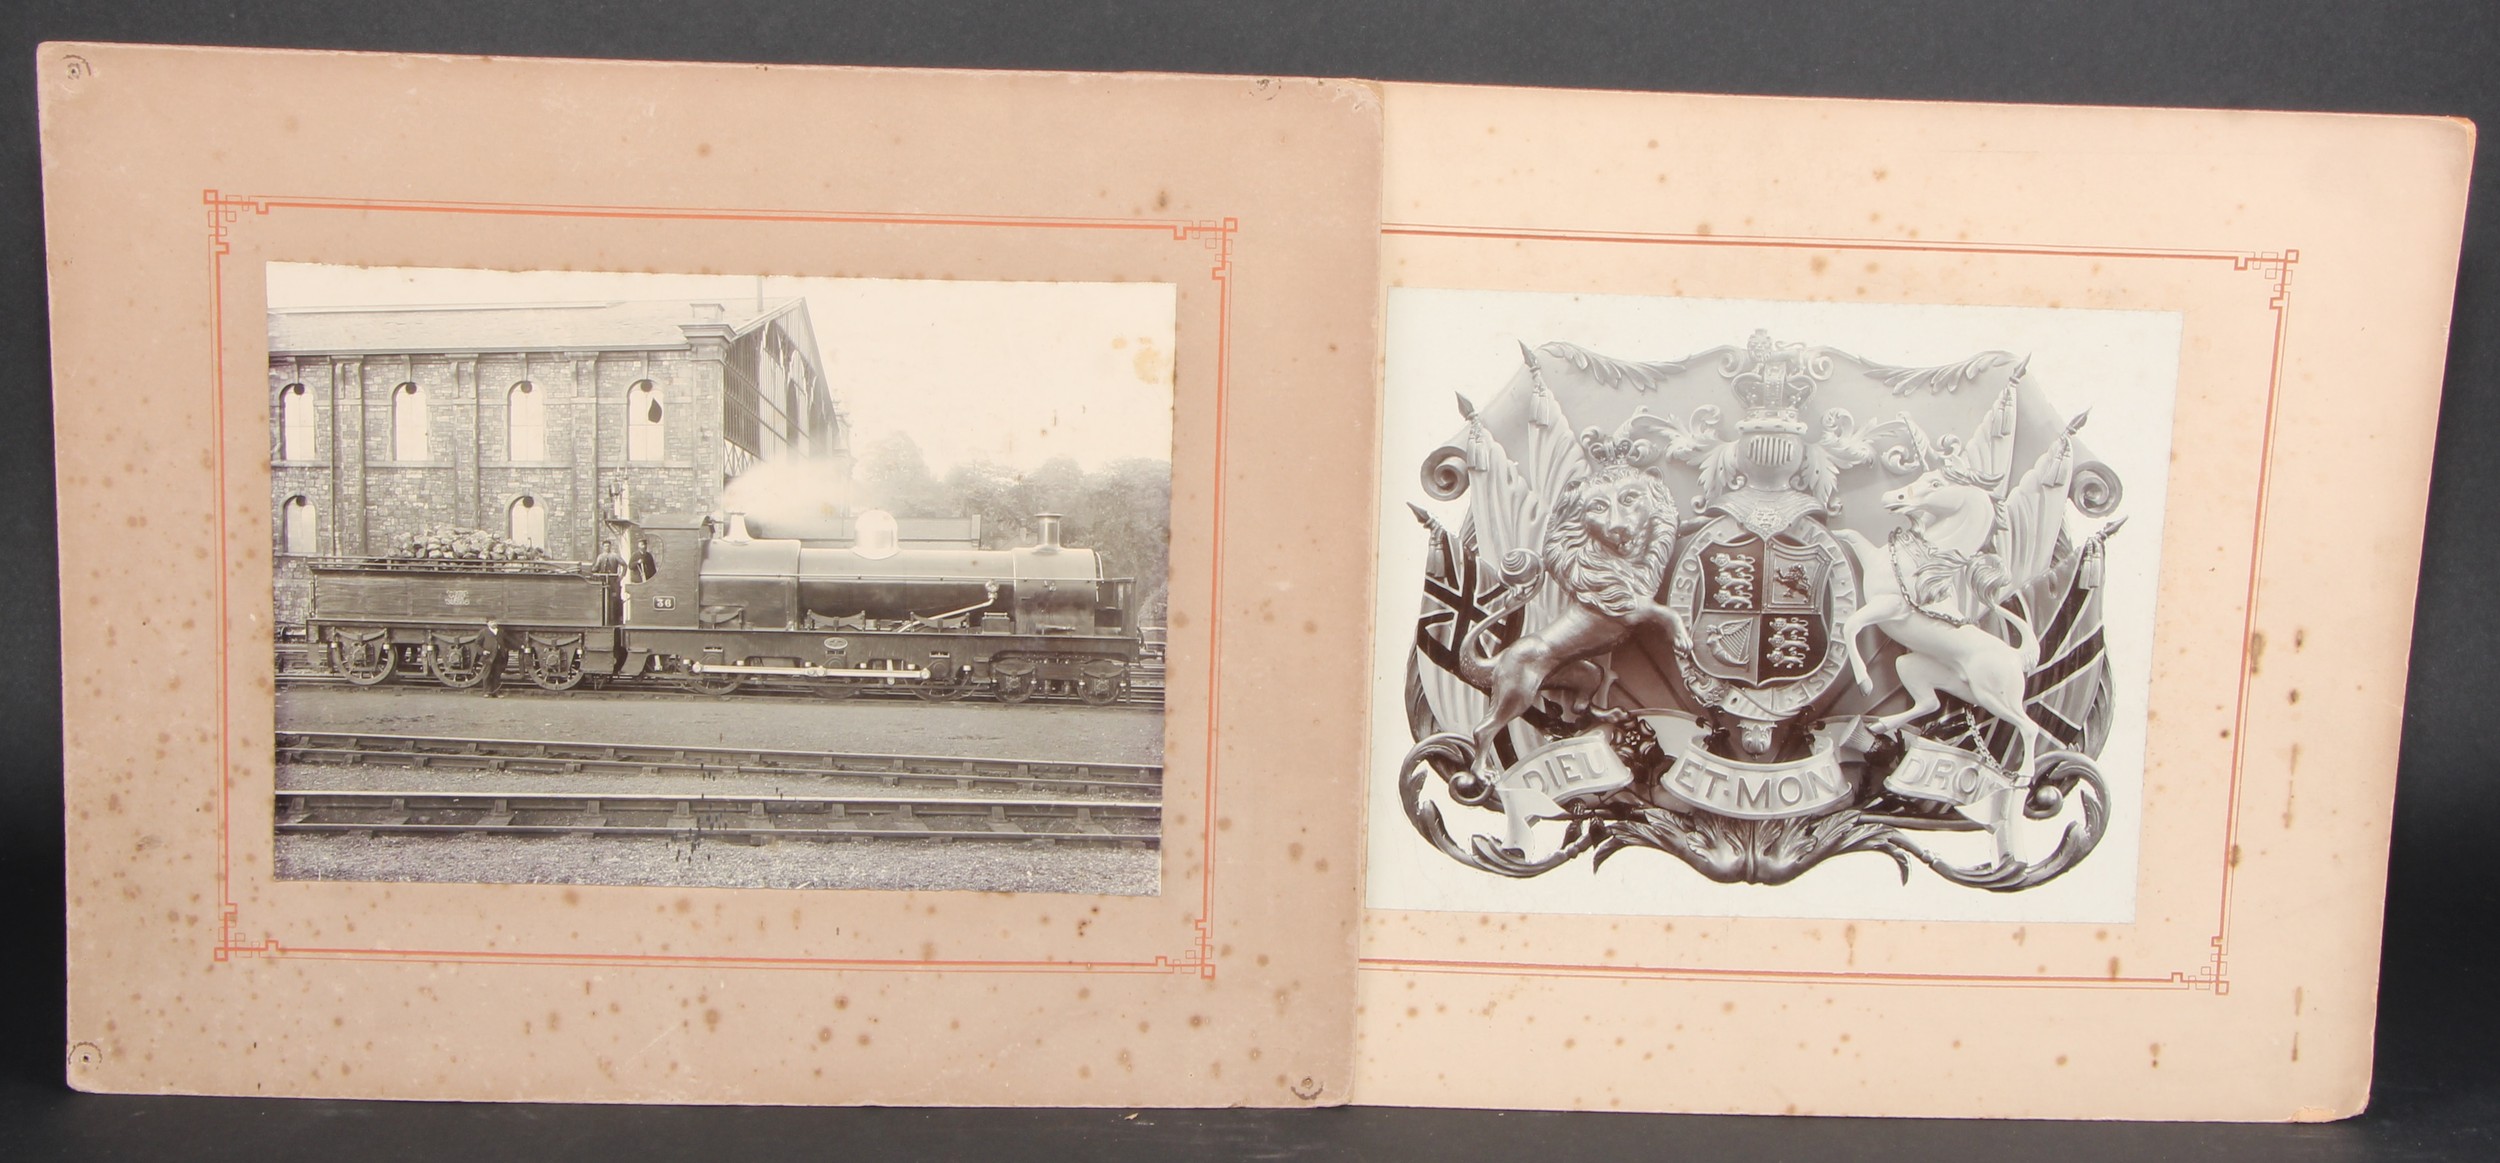 Photography - Railwayana - a collection of 19th century photographs of railway locomotives, many - Image 6 of 8